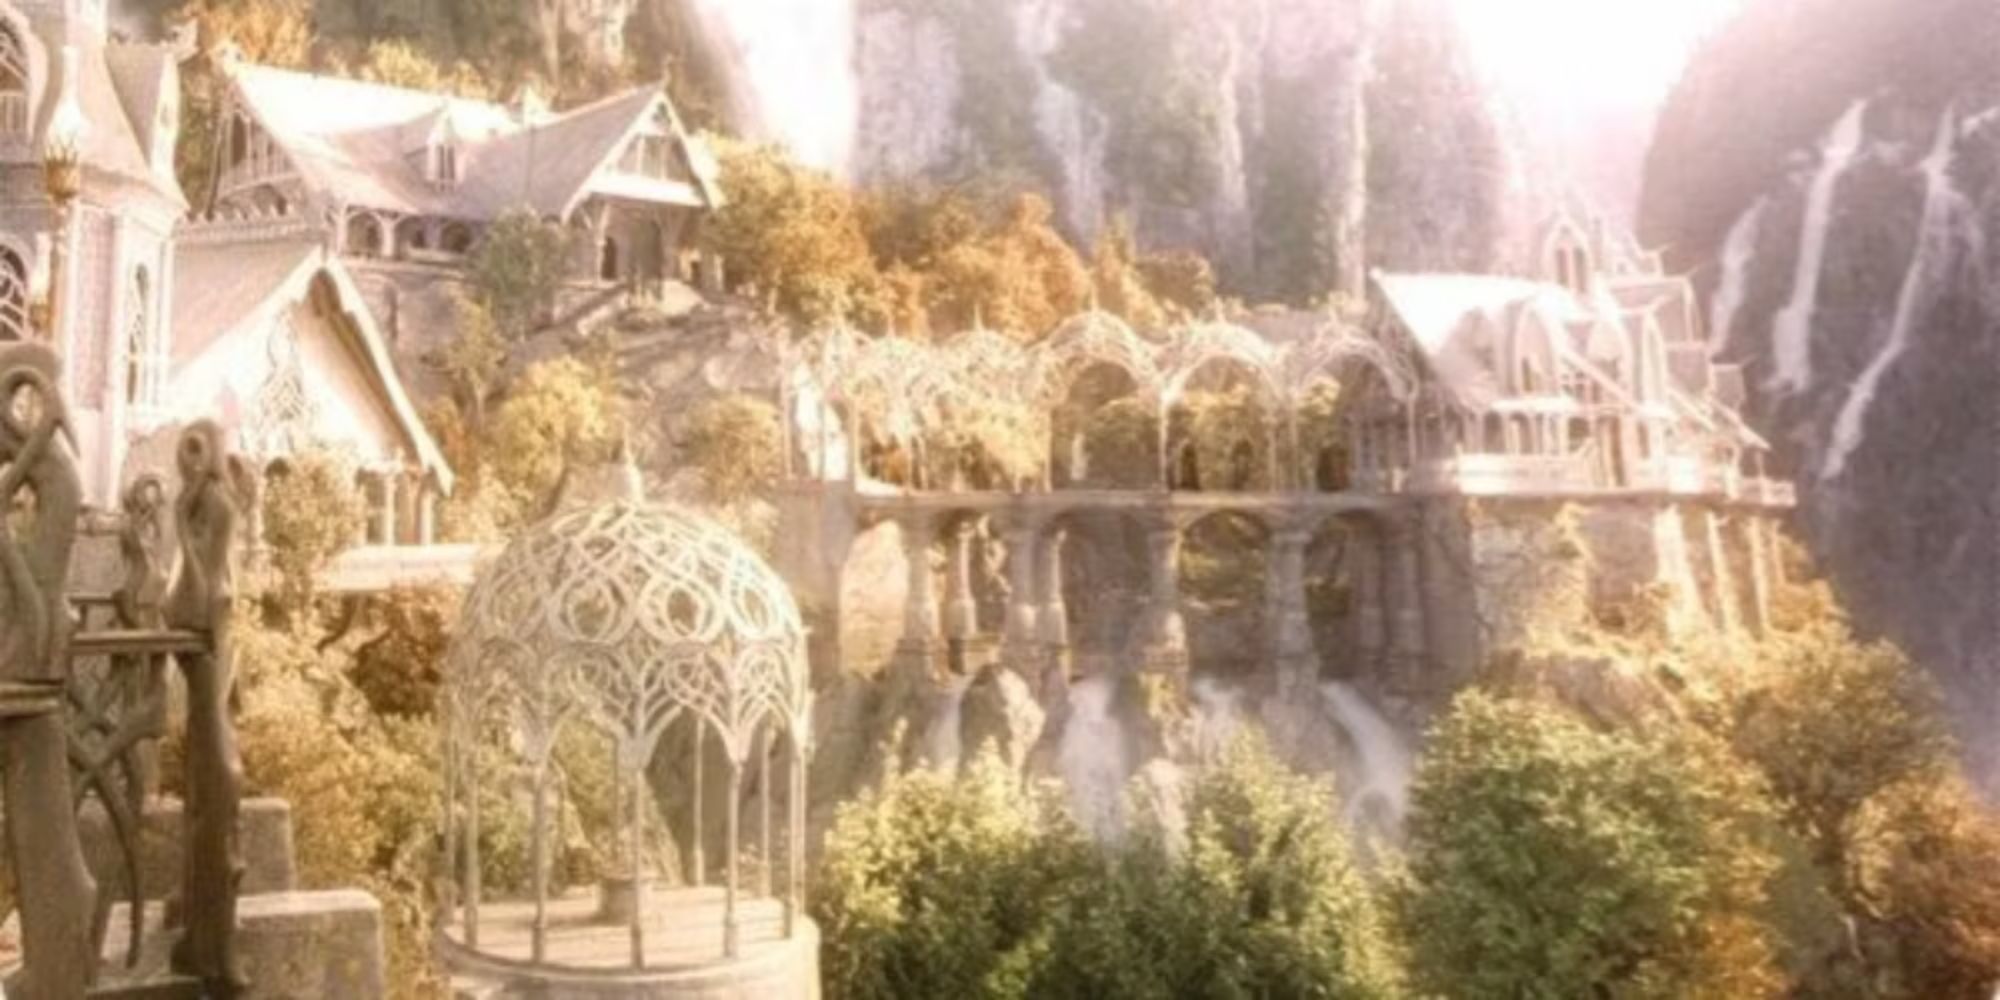 rivendell-lord-of-the-rings-the-fellowship-of-the-ring-2001 (1)